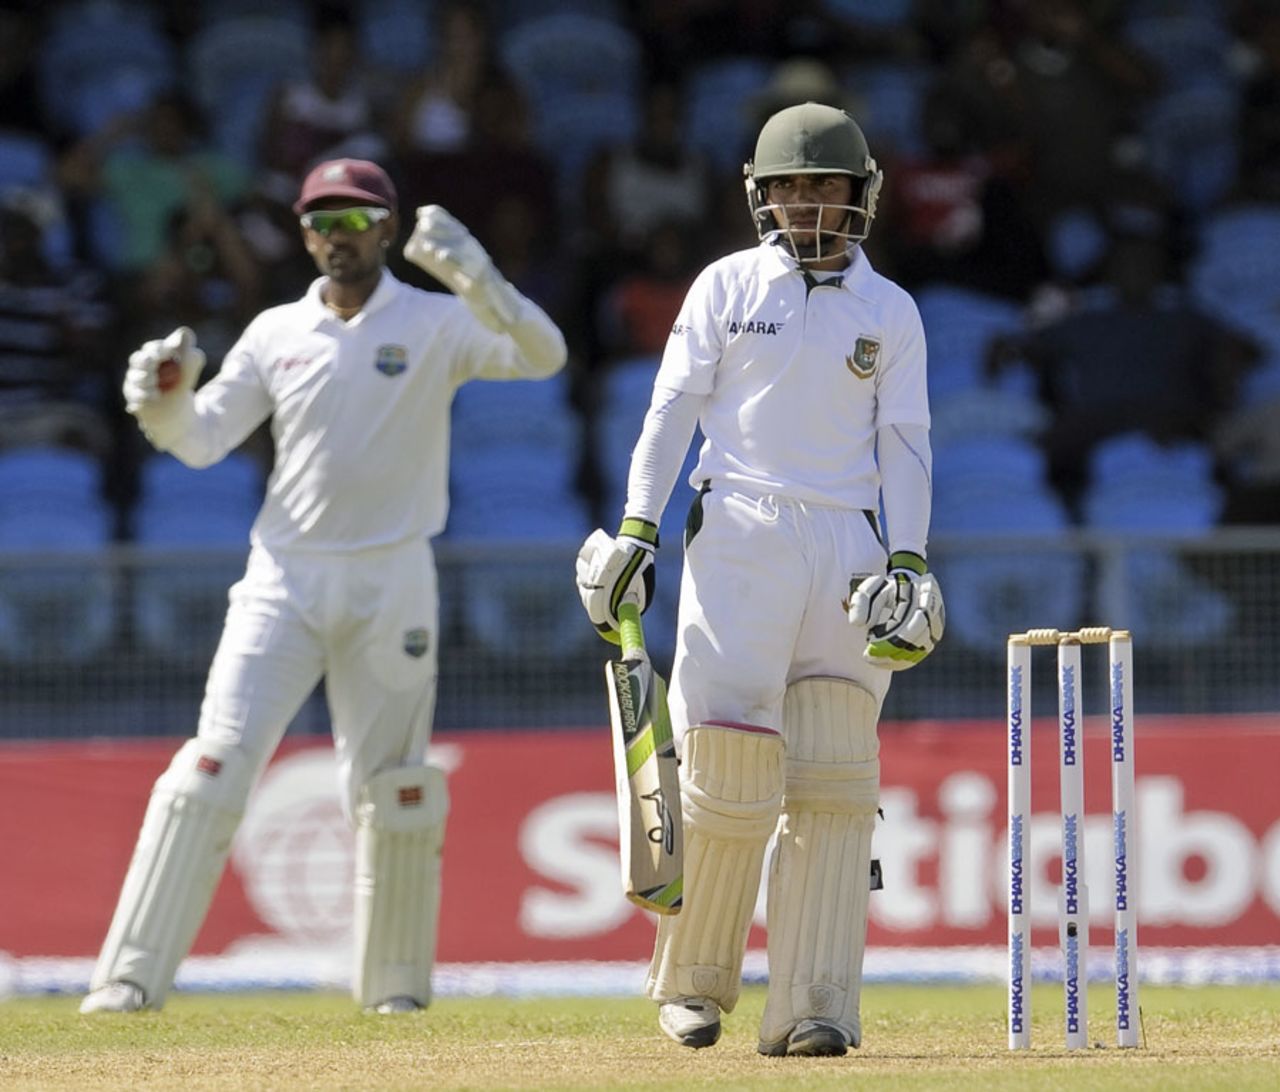 Mominul Haque was out caught behind for 51, West Indies v Bangladesh, 1st Test, St Vincent, 3rd day, September 7, 2014